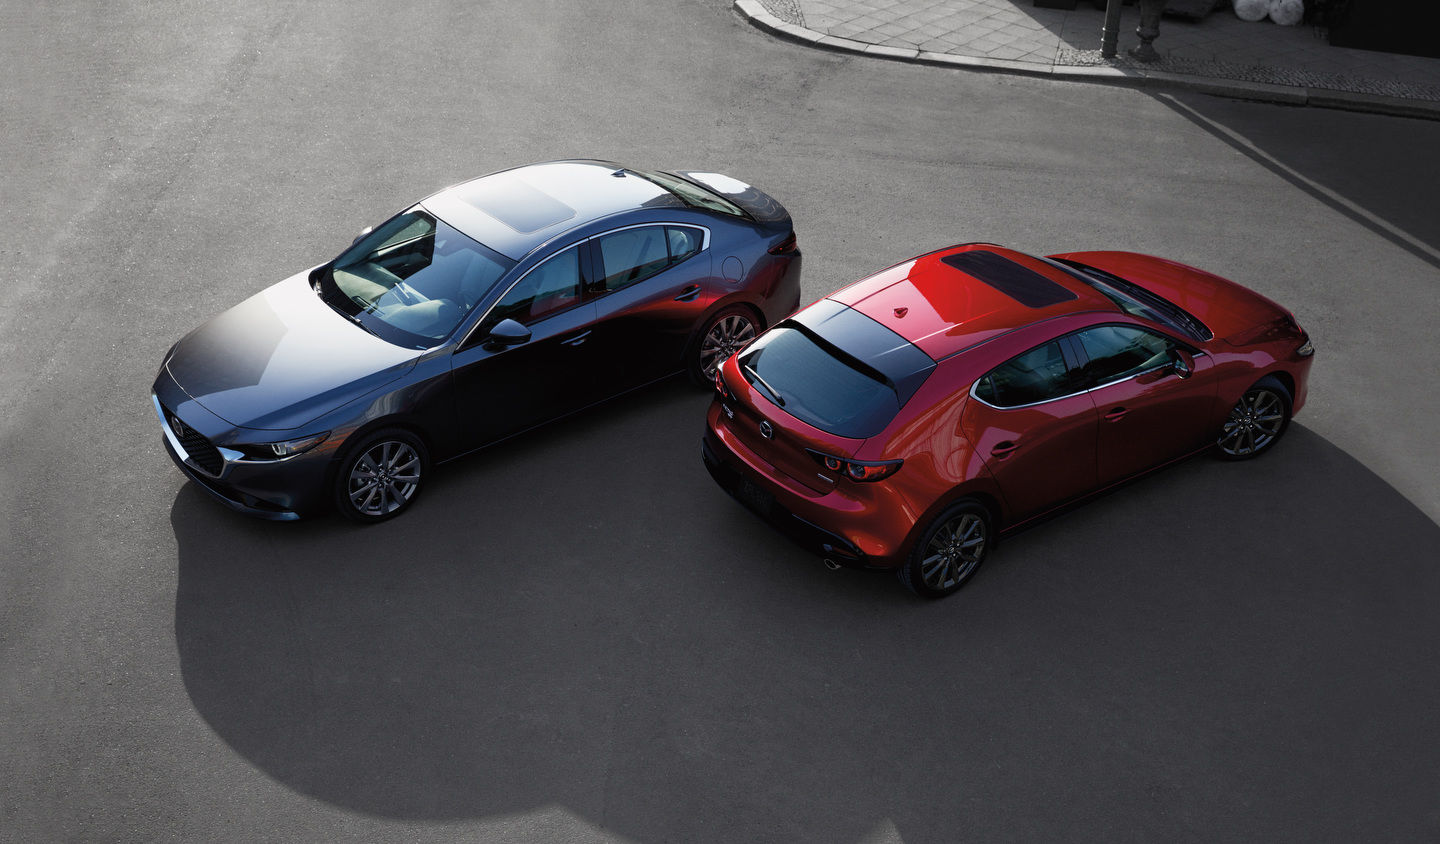 Pre-Owned Mazda3: A Smart Choice for Compact Car Buyers